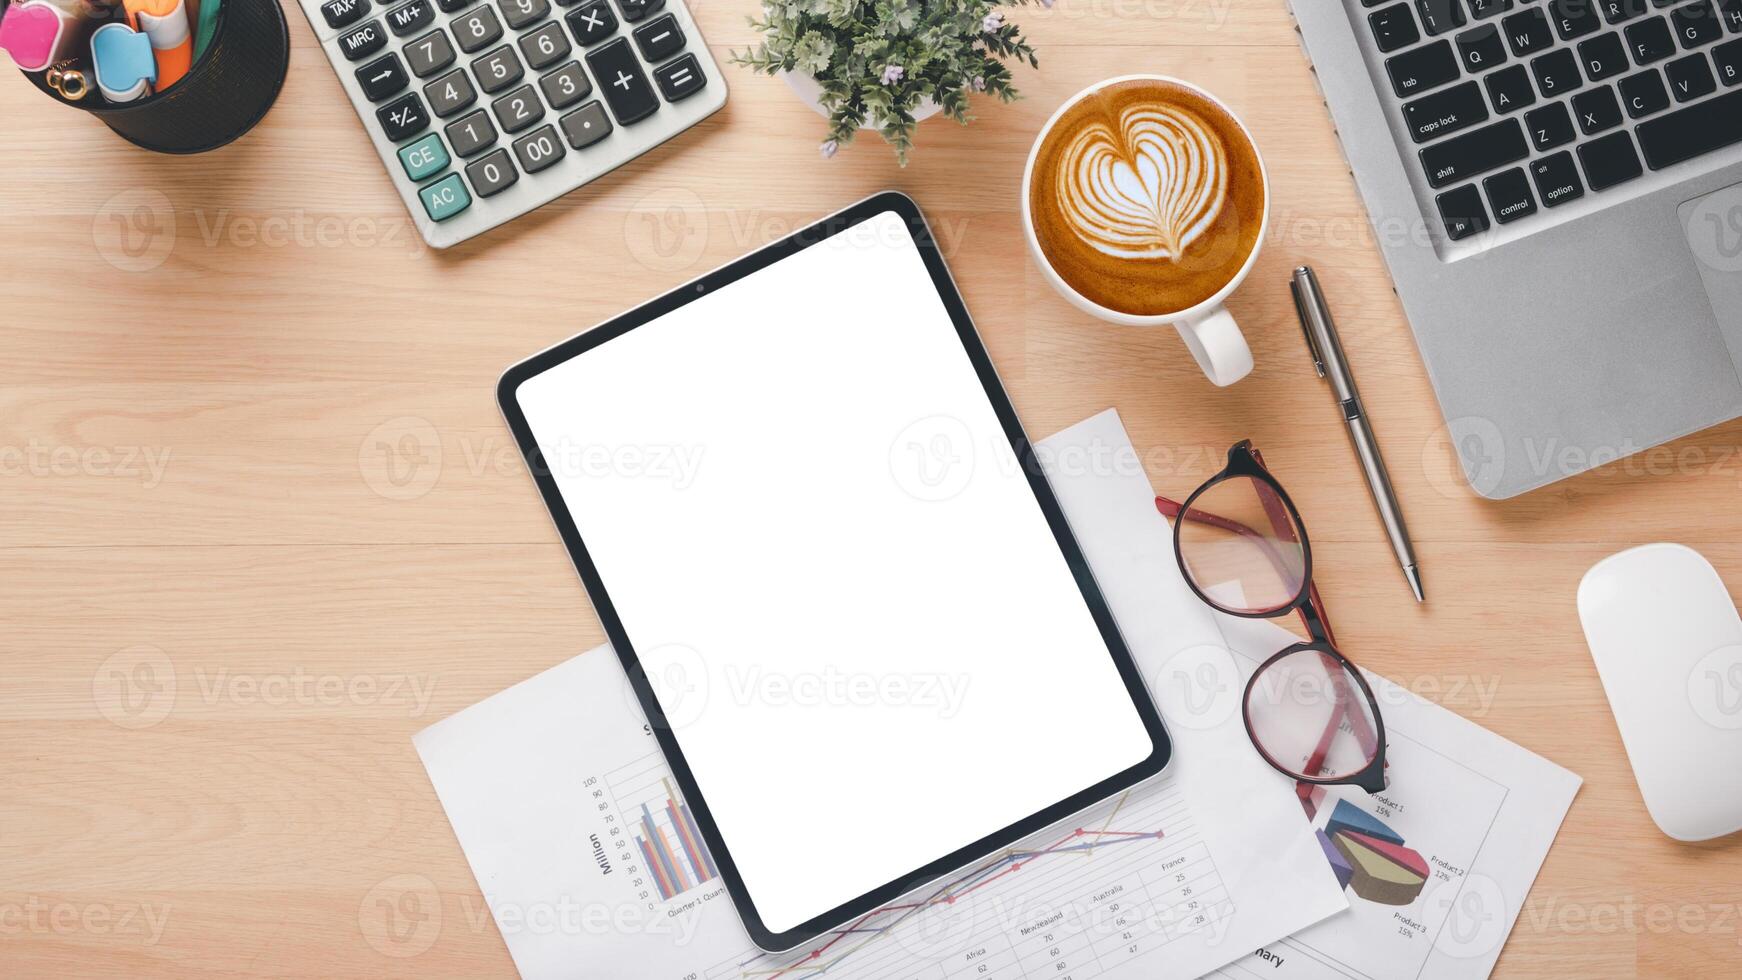 A tablet sits on a desk with a cup of coffee and a pen. The tablet is empty, and the coffee cup has a heart design on it. The scene suggests a moment of relaxation or contemplation photo